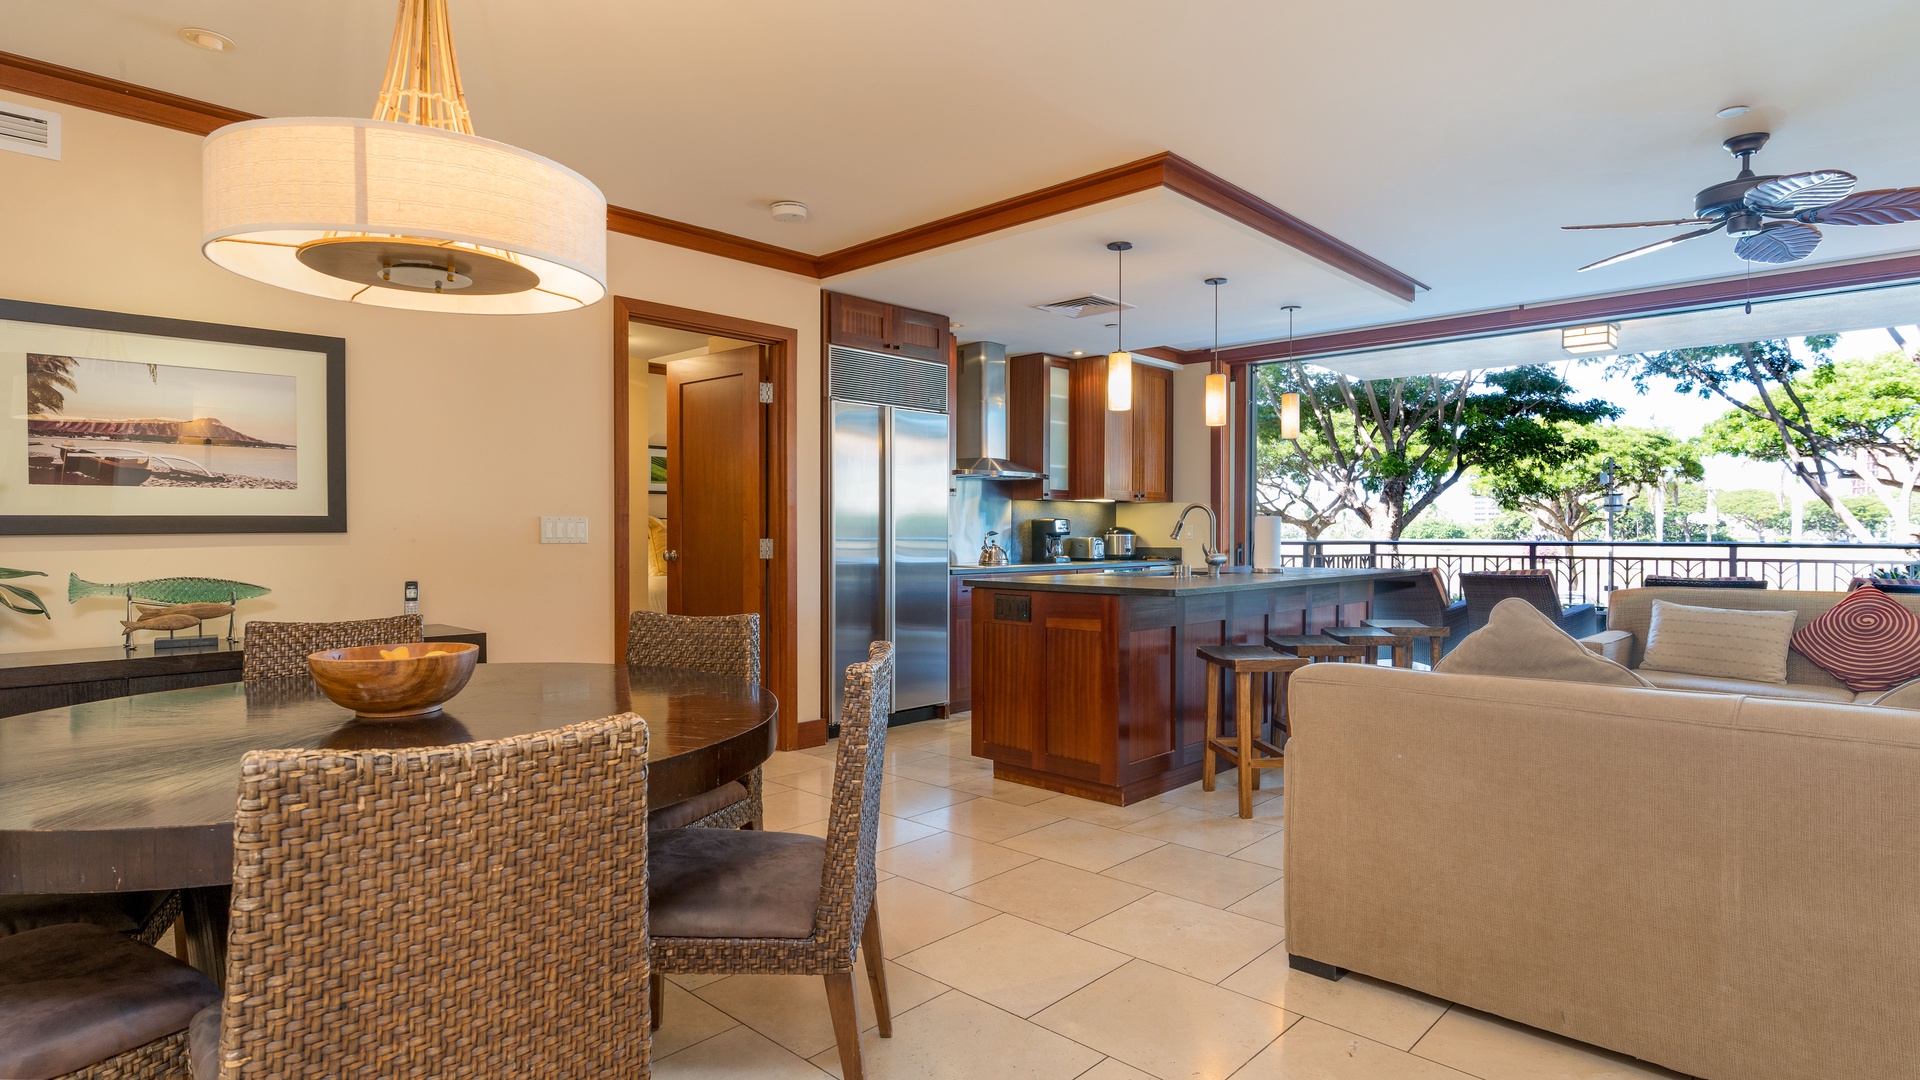 Kapolei Vacation Rentals, Ko Olina Beach Villas B202 - The incredible kitchen featuring stainless steel appliances and bar seating.